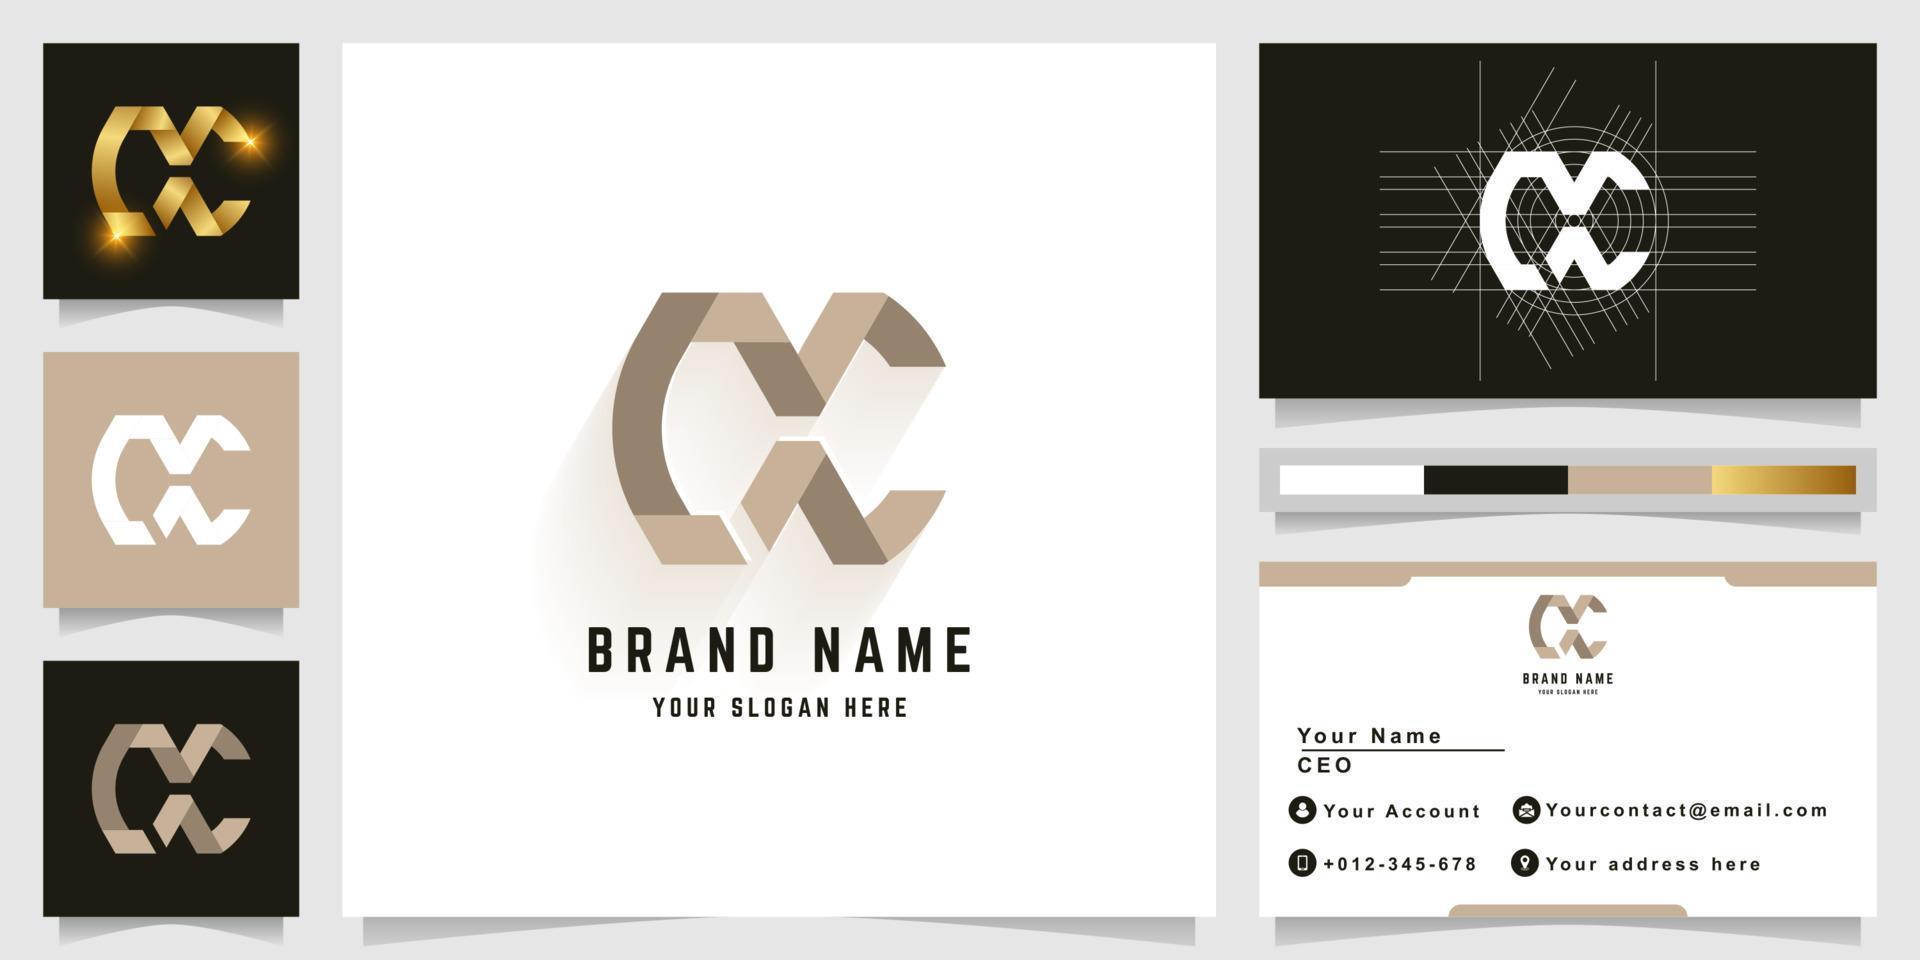 Letter CX or OC monogram logo with business card design vector